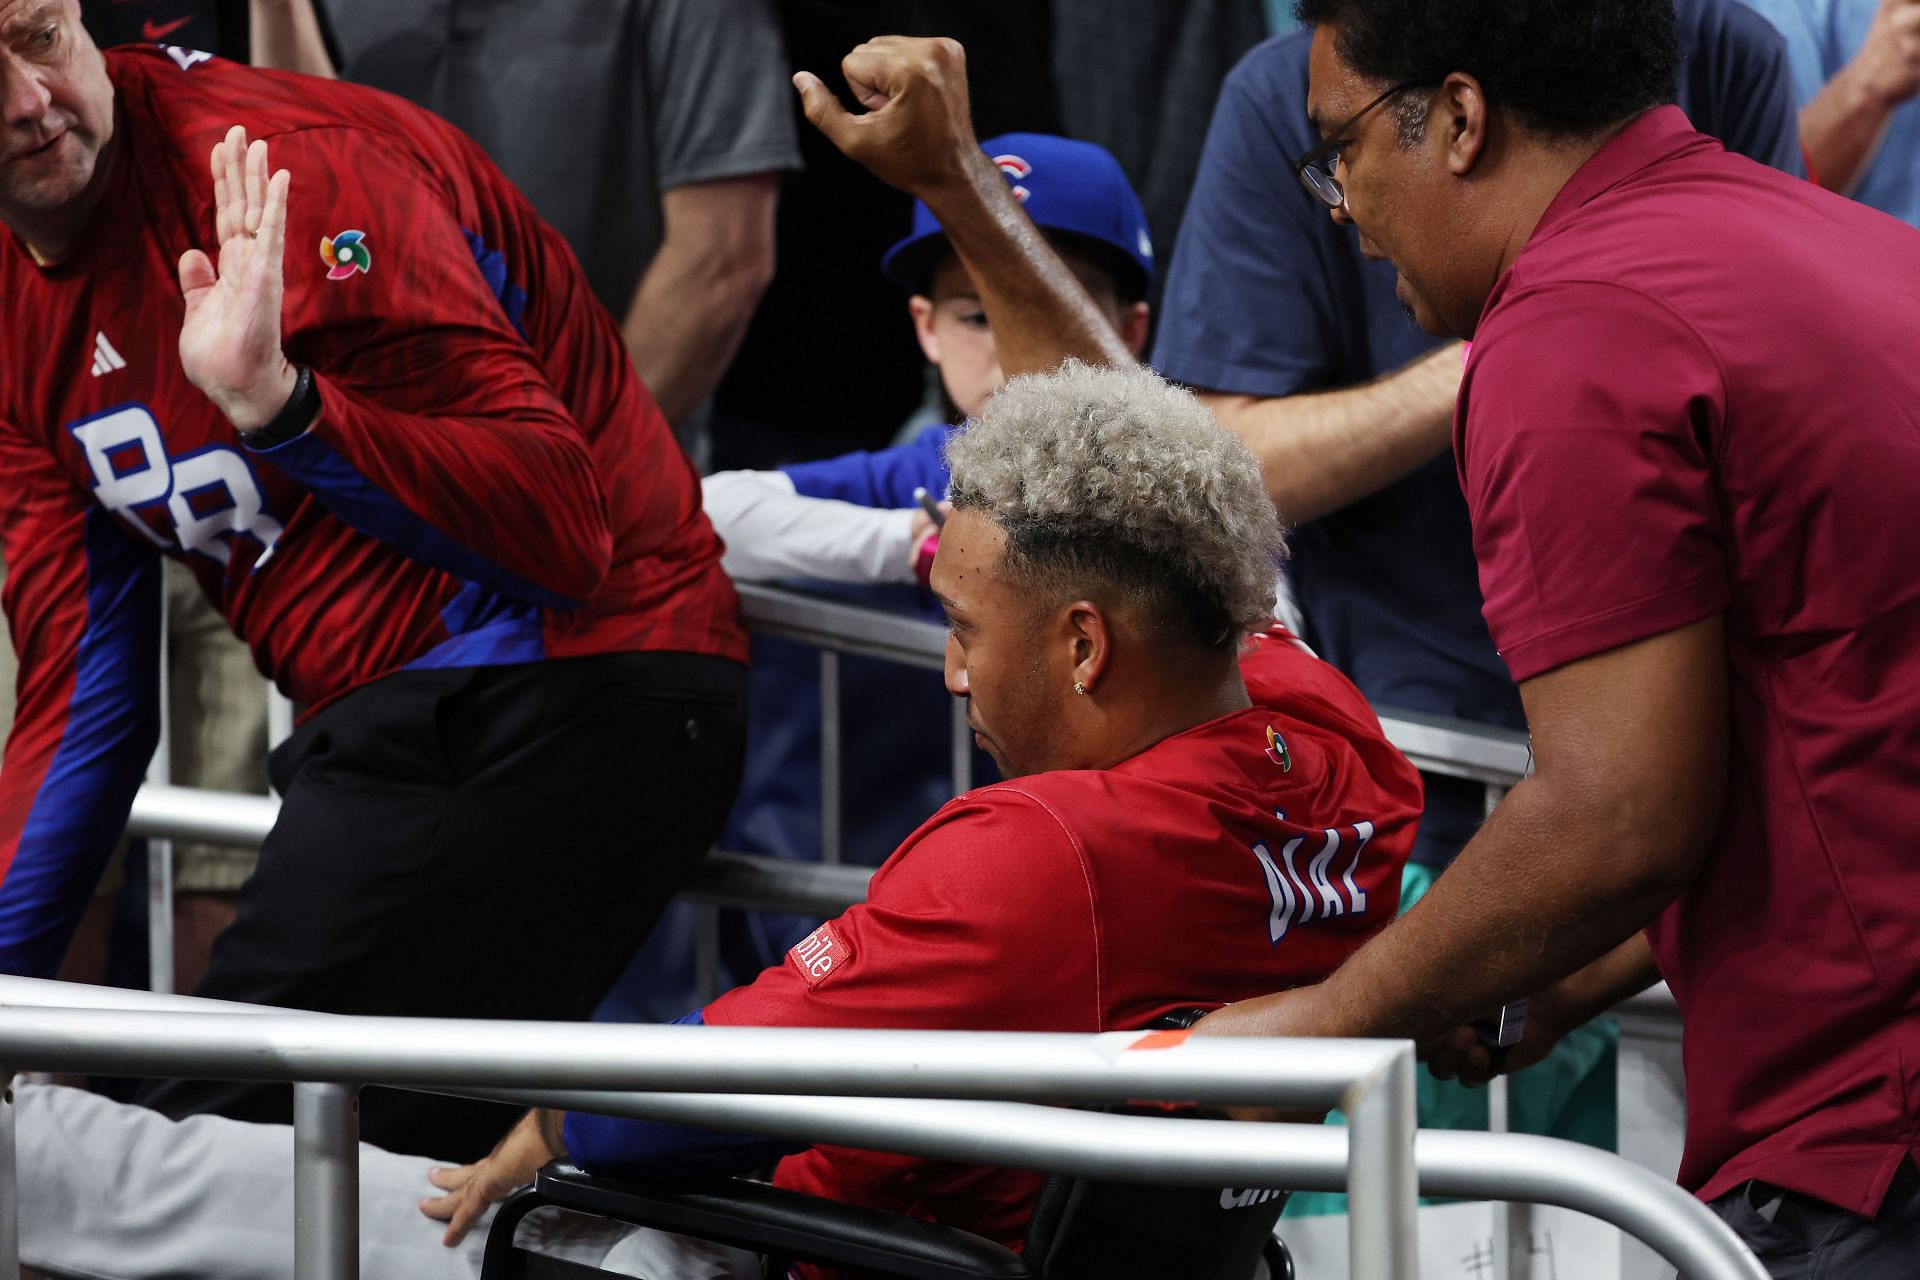 Edwin Diaz of Team Puerto Rico leaves the field in a wheelchair after sustaining an injury while celebrating a 5-2 win against Team Dominican Republic.